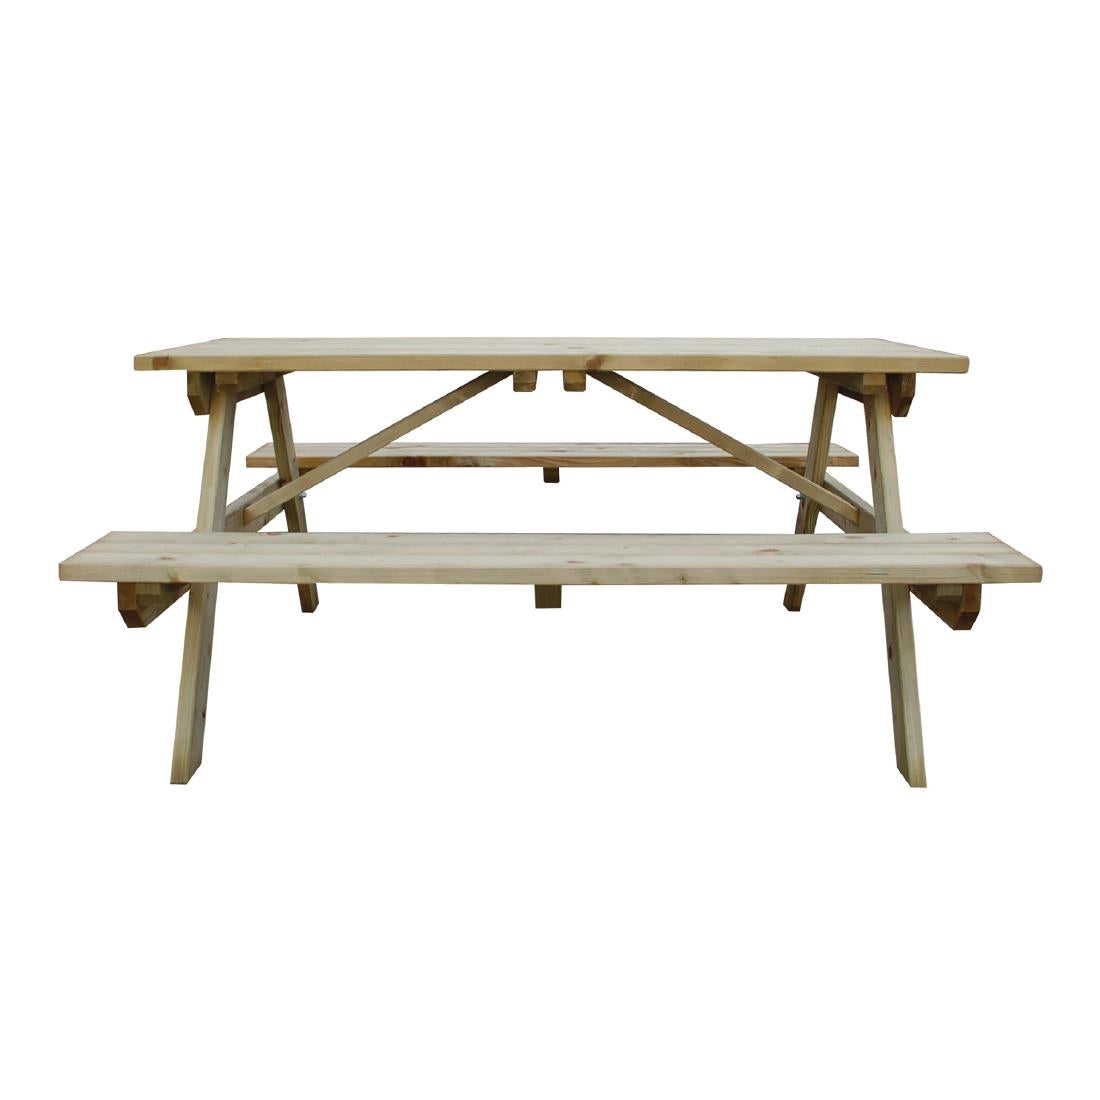 Rowlinson Wooden Picnic Bench 5ft 1500mm